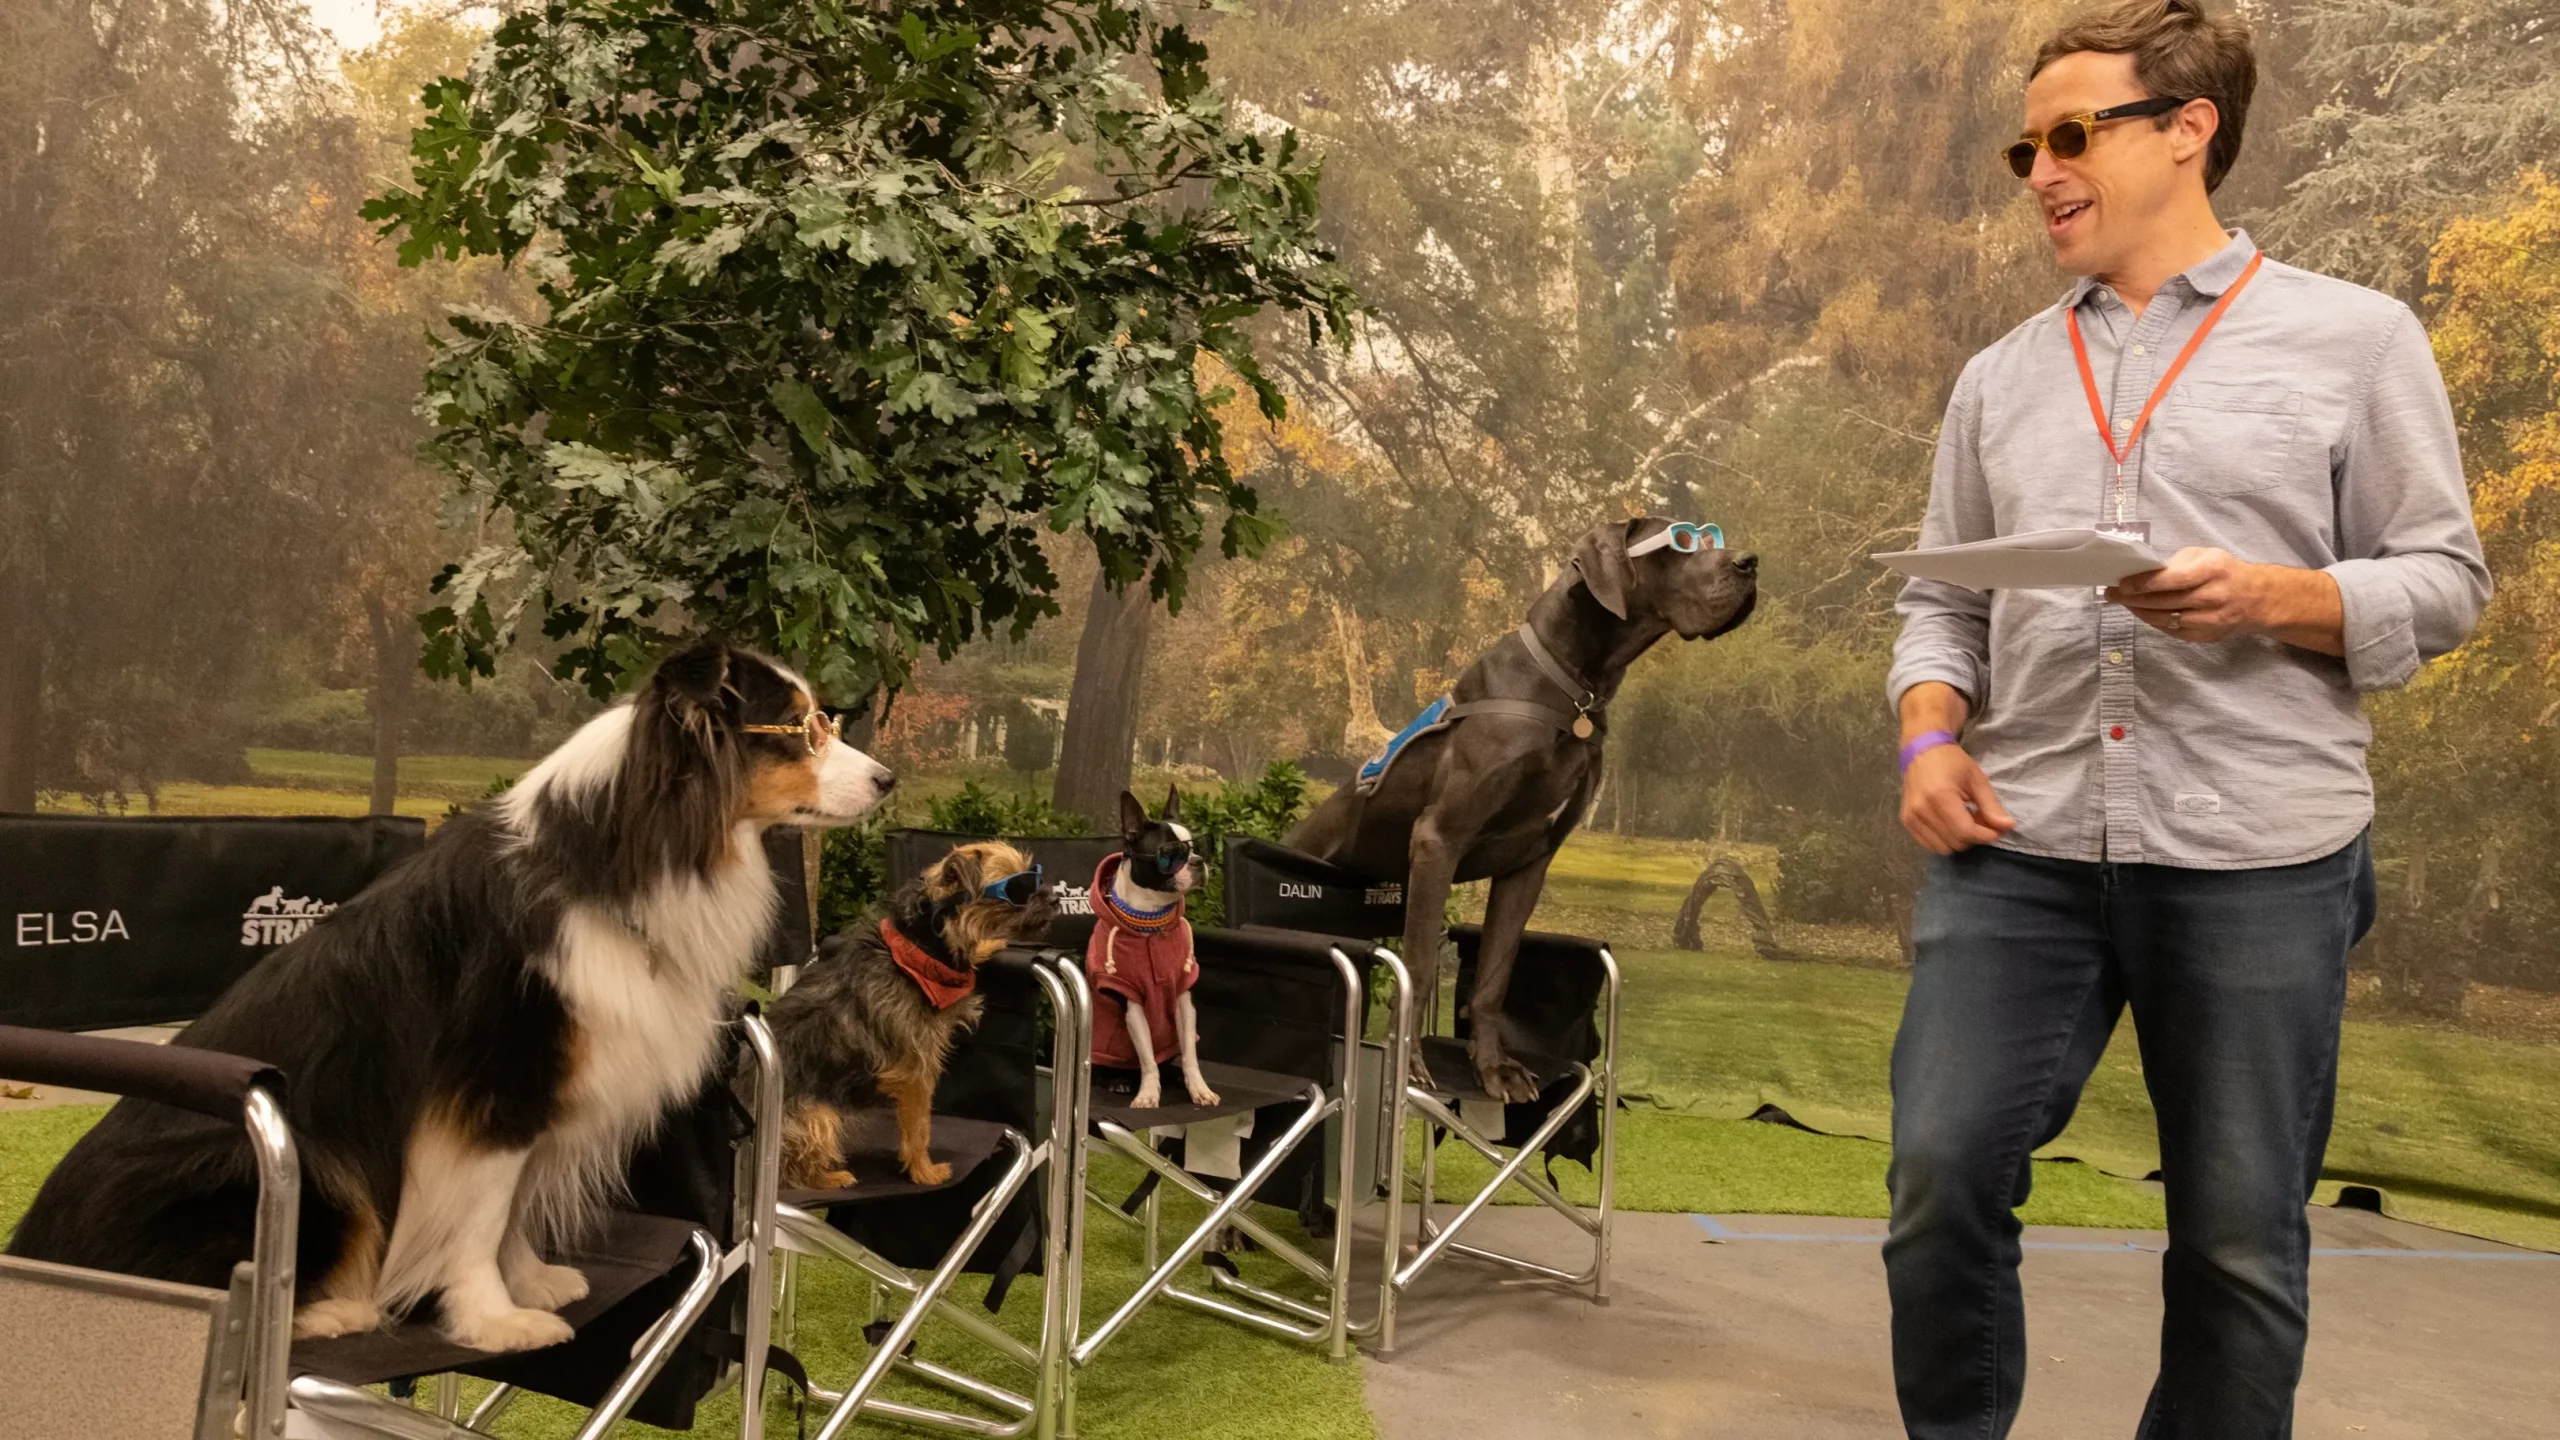 The gang of local dogs in the movie, Strays, shot also in Atlanta (Credits: Universal Pictures)